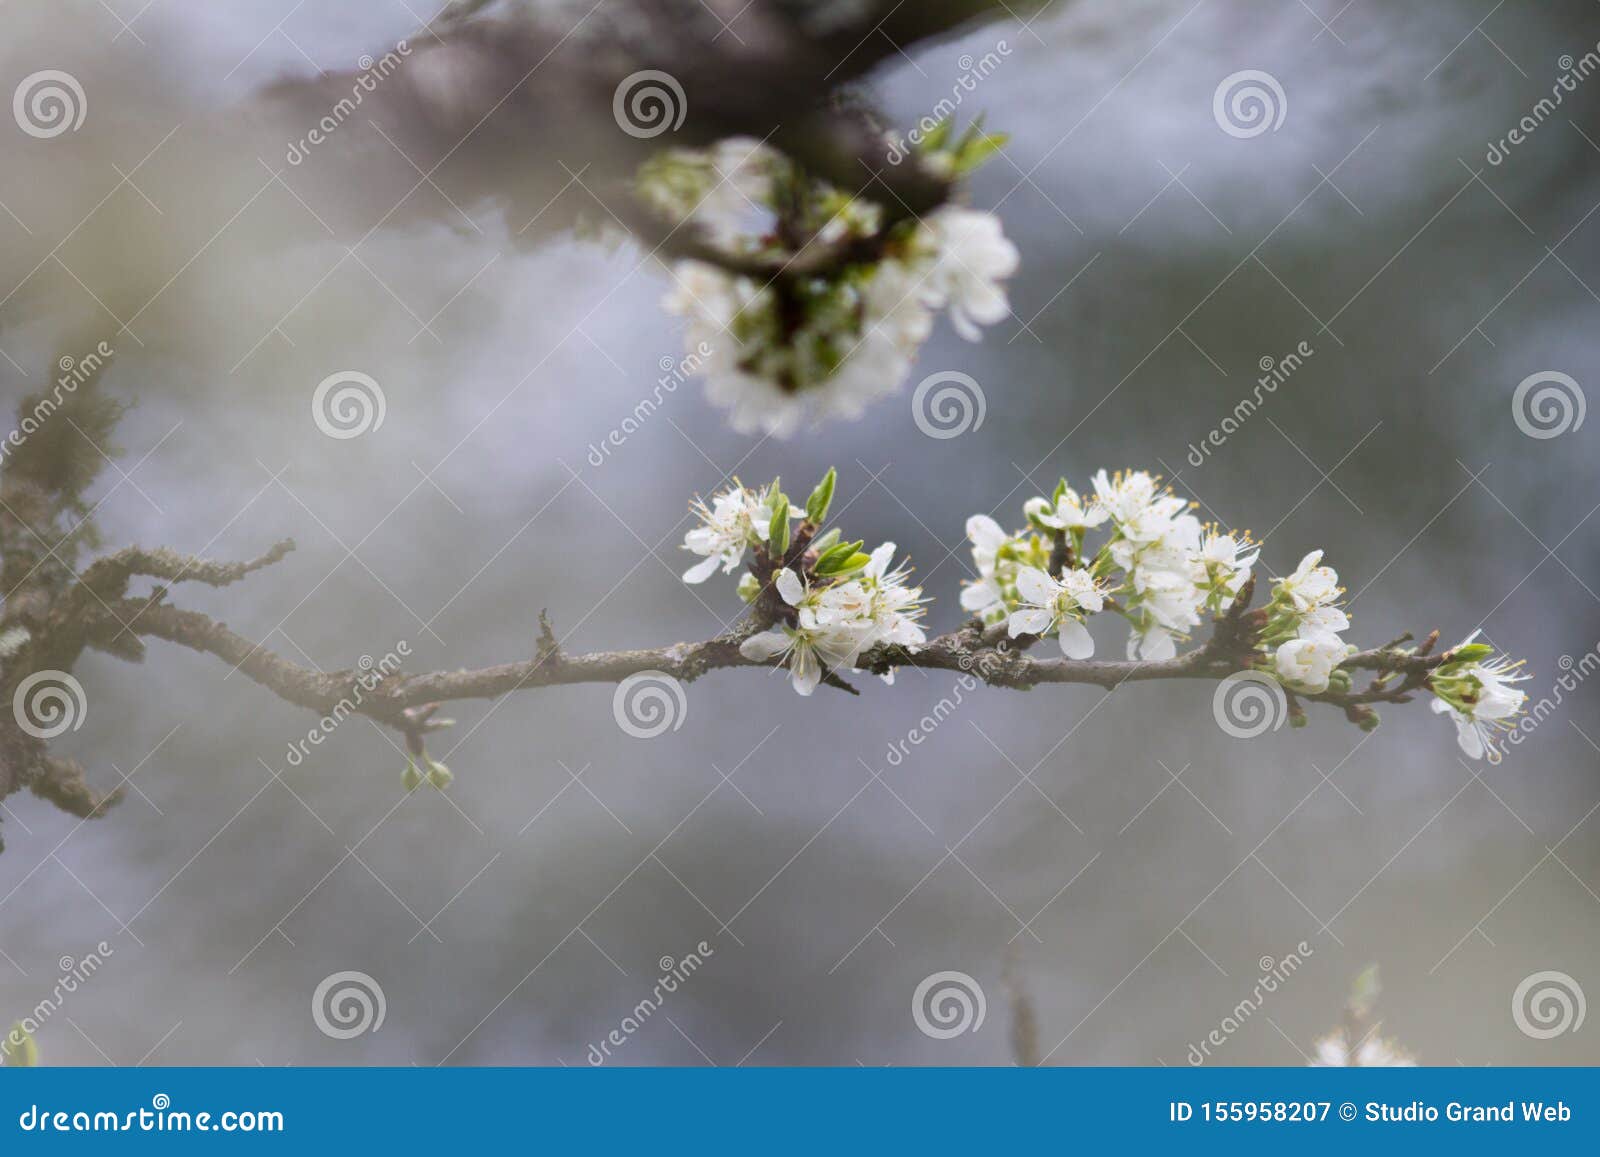 cherry blossom flower in foggy blurry background for relaxing serenity